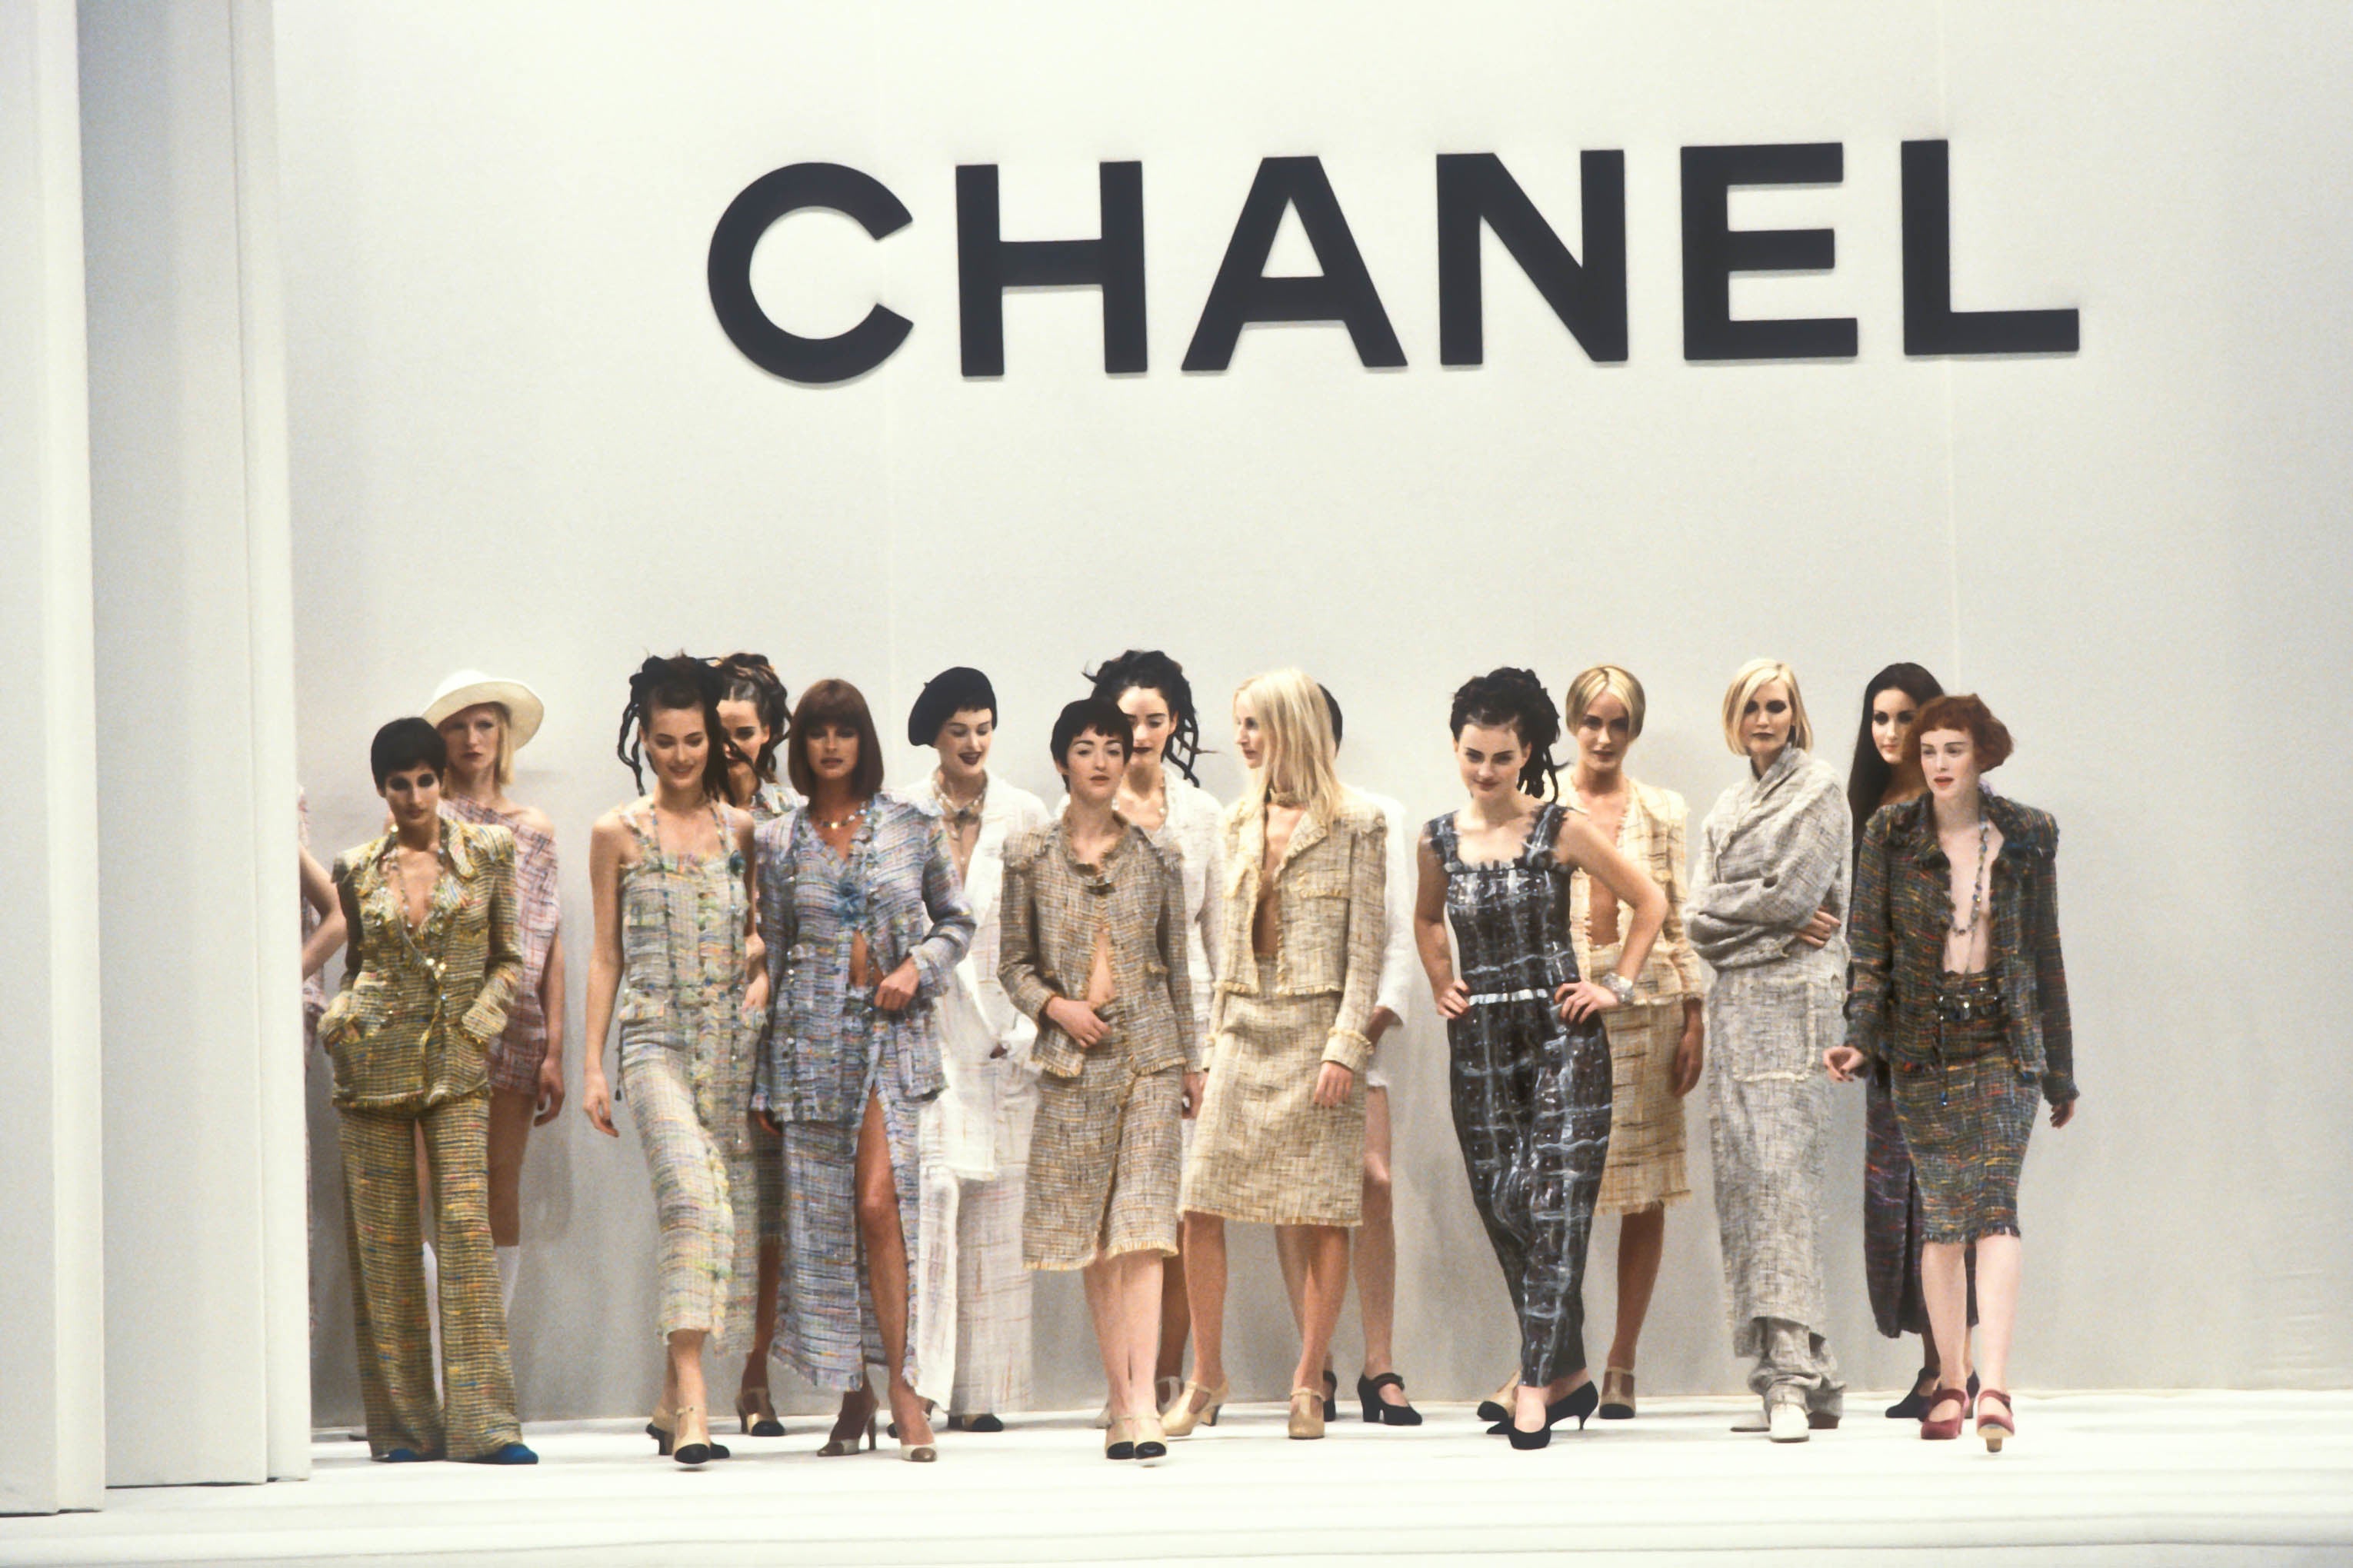 Chanel – ARCHIVE